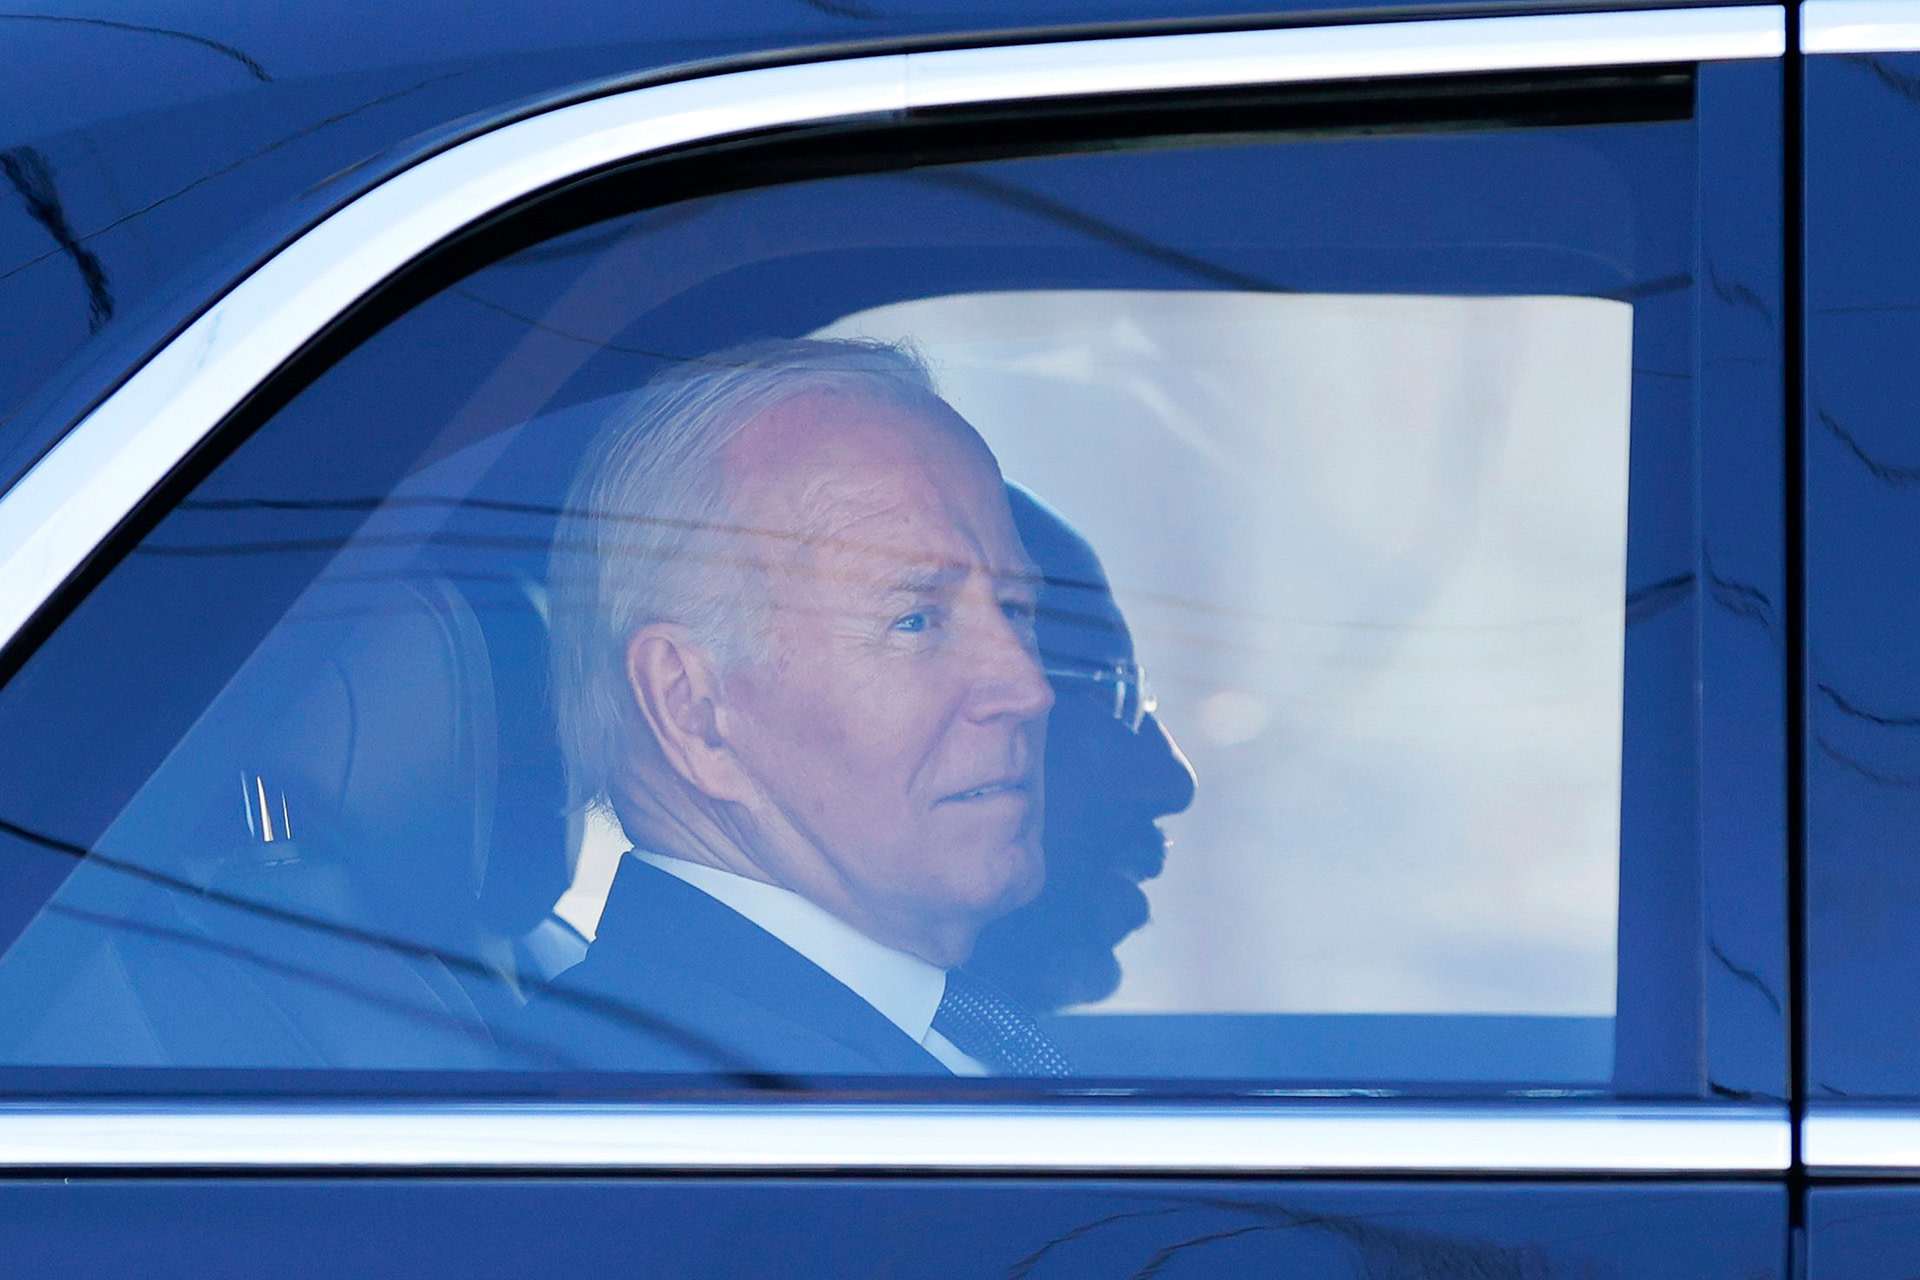 White House says no visitors logs for Biden’s Delaware home